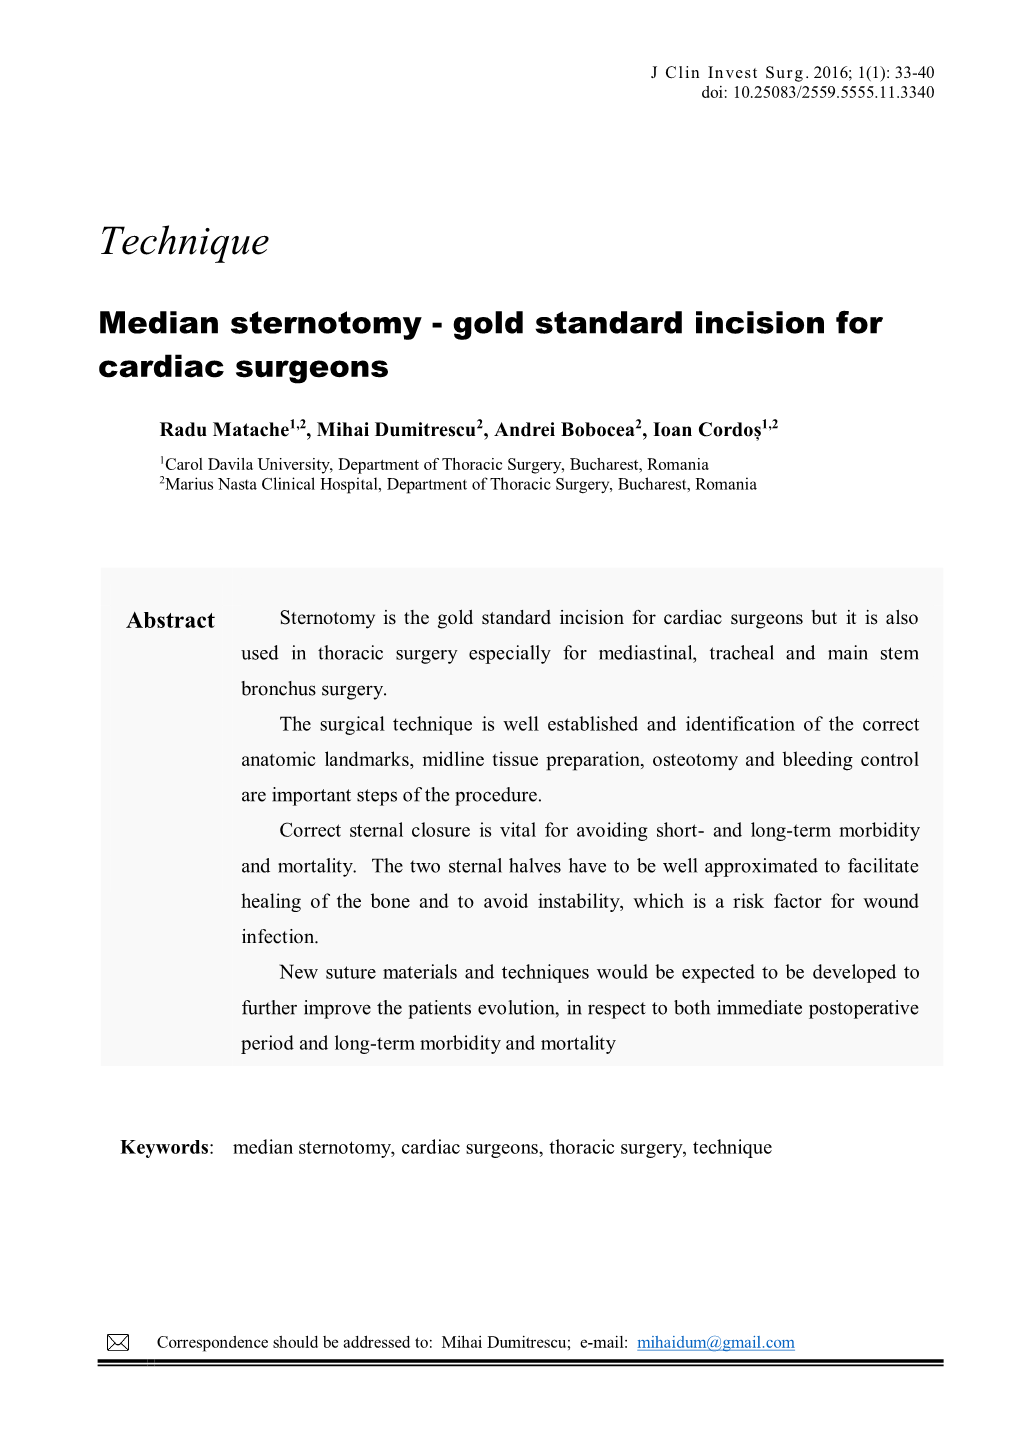 Median Sternotomy - Gold Standard Incision for Cardiac Surgeons